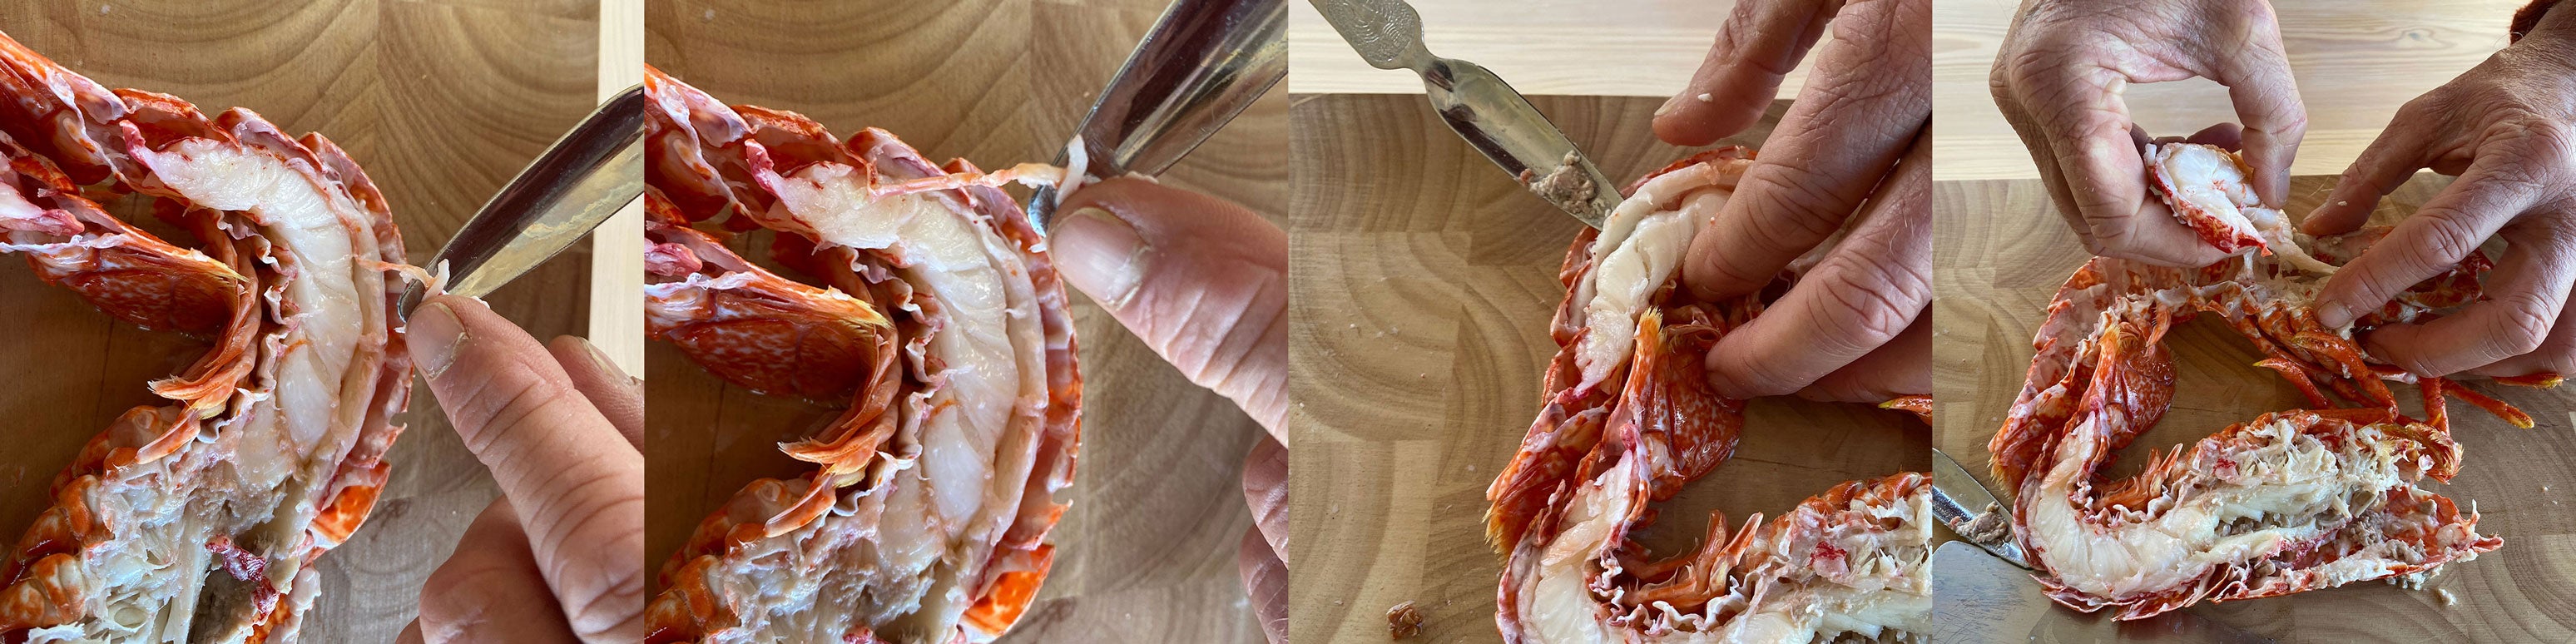 Remove the tract from the tail meat and remove the lobster tail meat turn it over and put it back in the opposite shell.